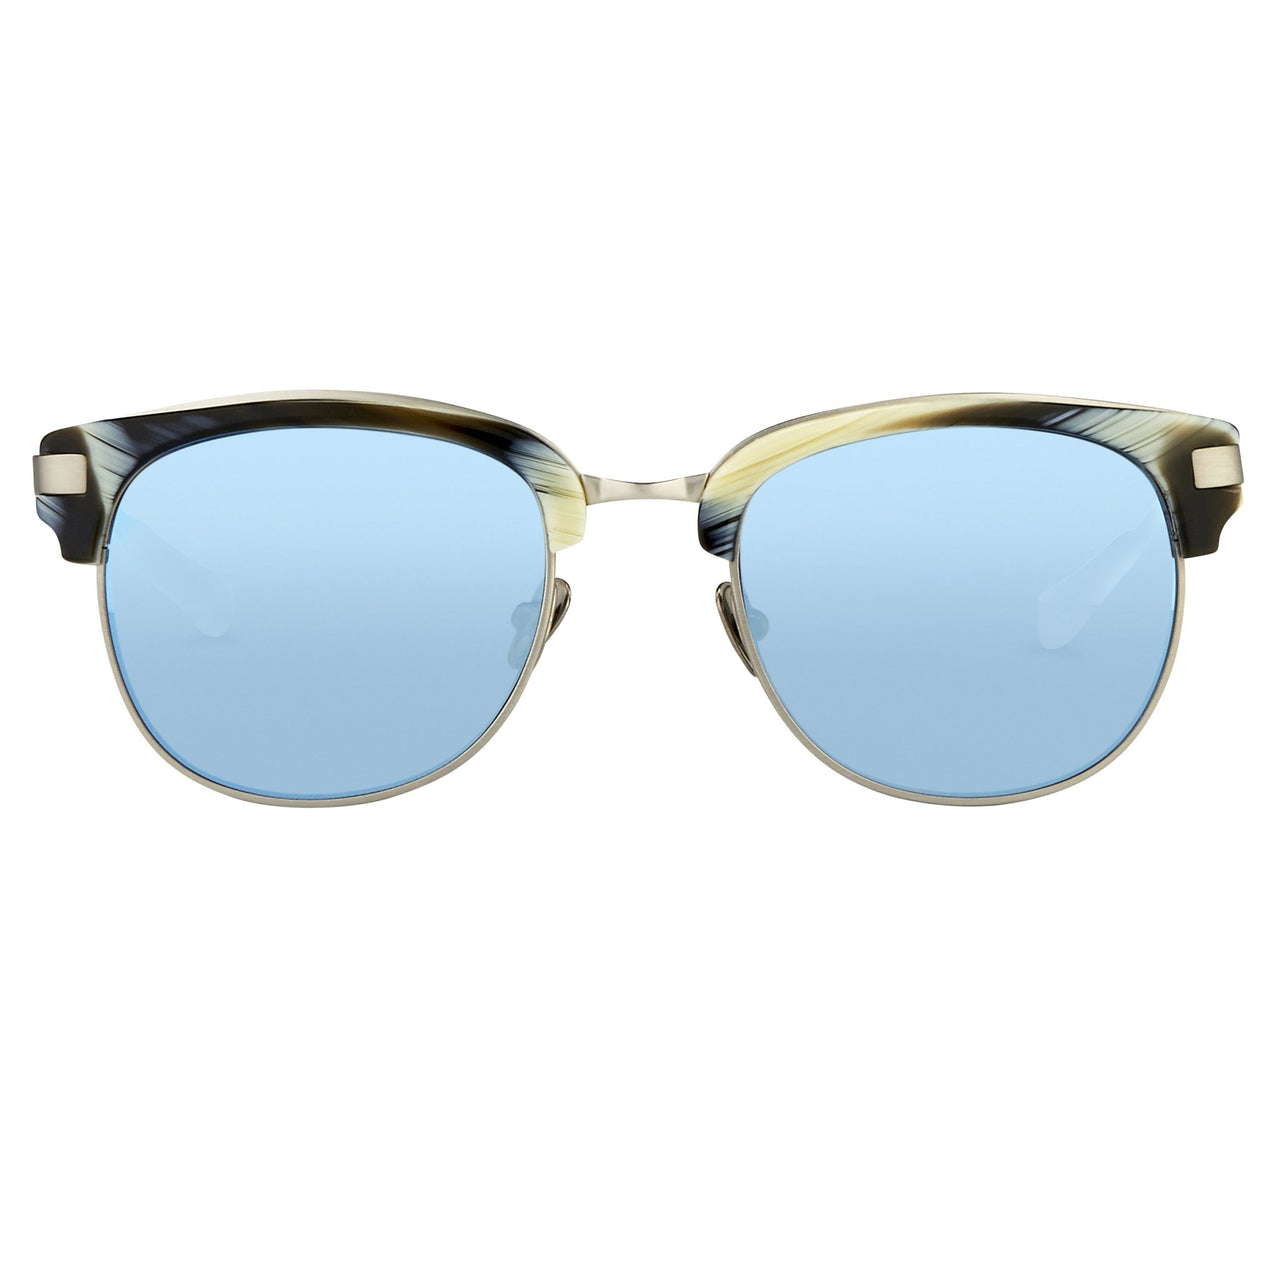 Kris Van Assche Sunglasses with D-Frame Brown Horn Brushed Silver and Blue Mirror Lenses Category 3 - KVA76C4SUN - Watches & Crystals